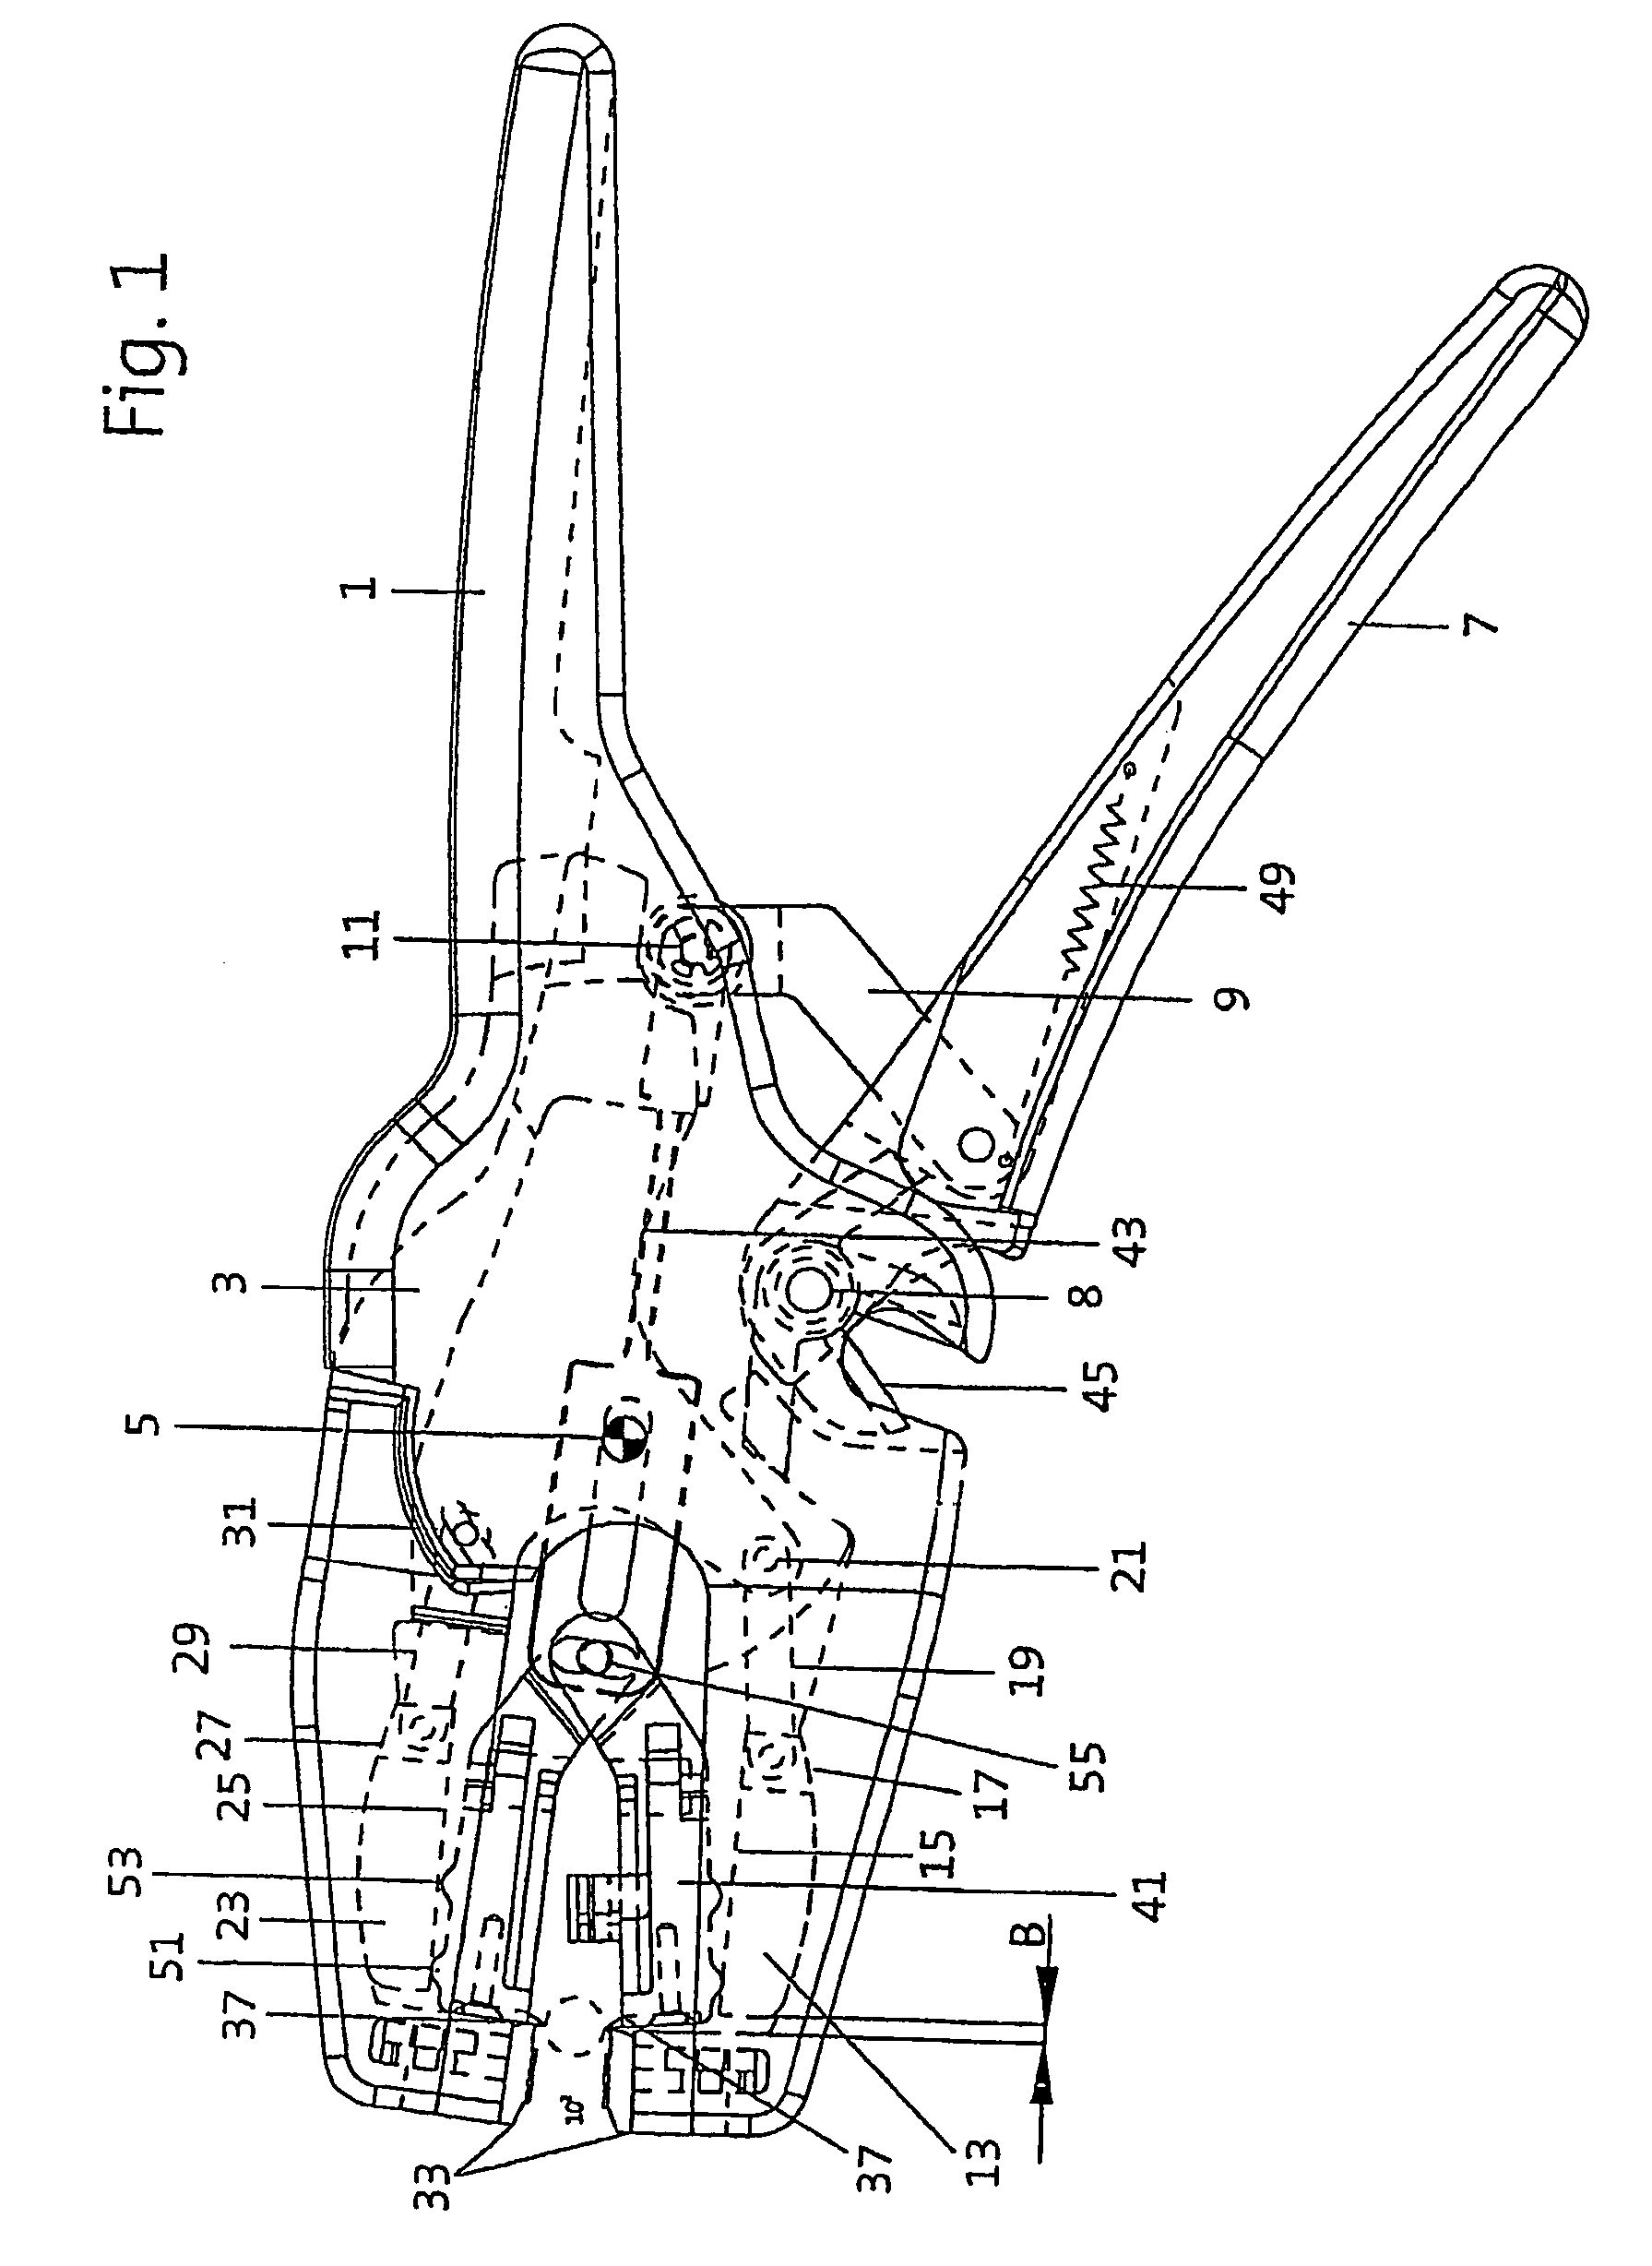 Wire stripper which can be automatically adapted to different conductor cross sections